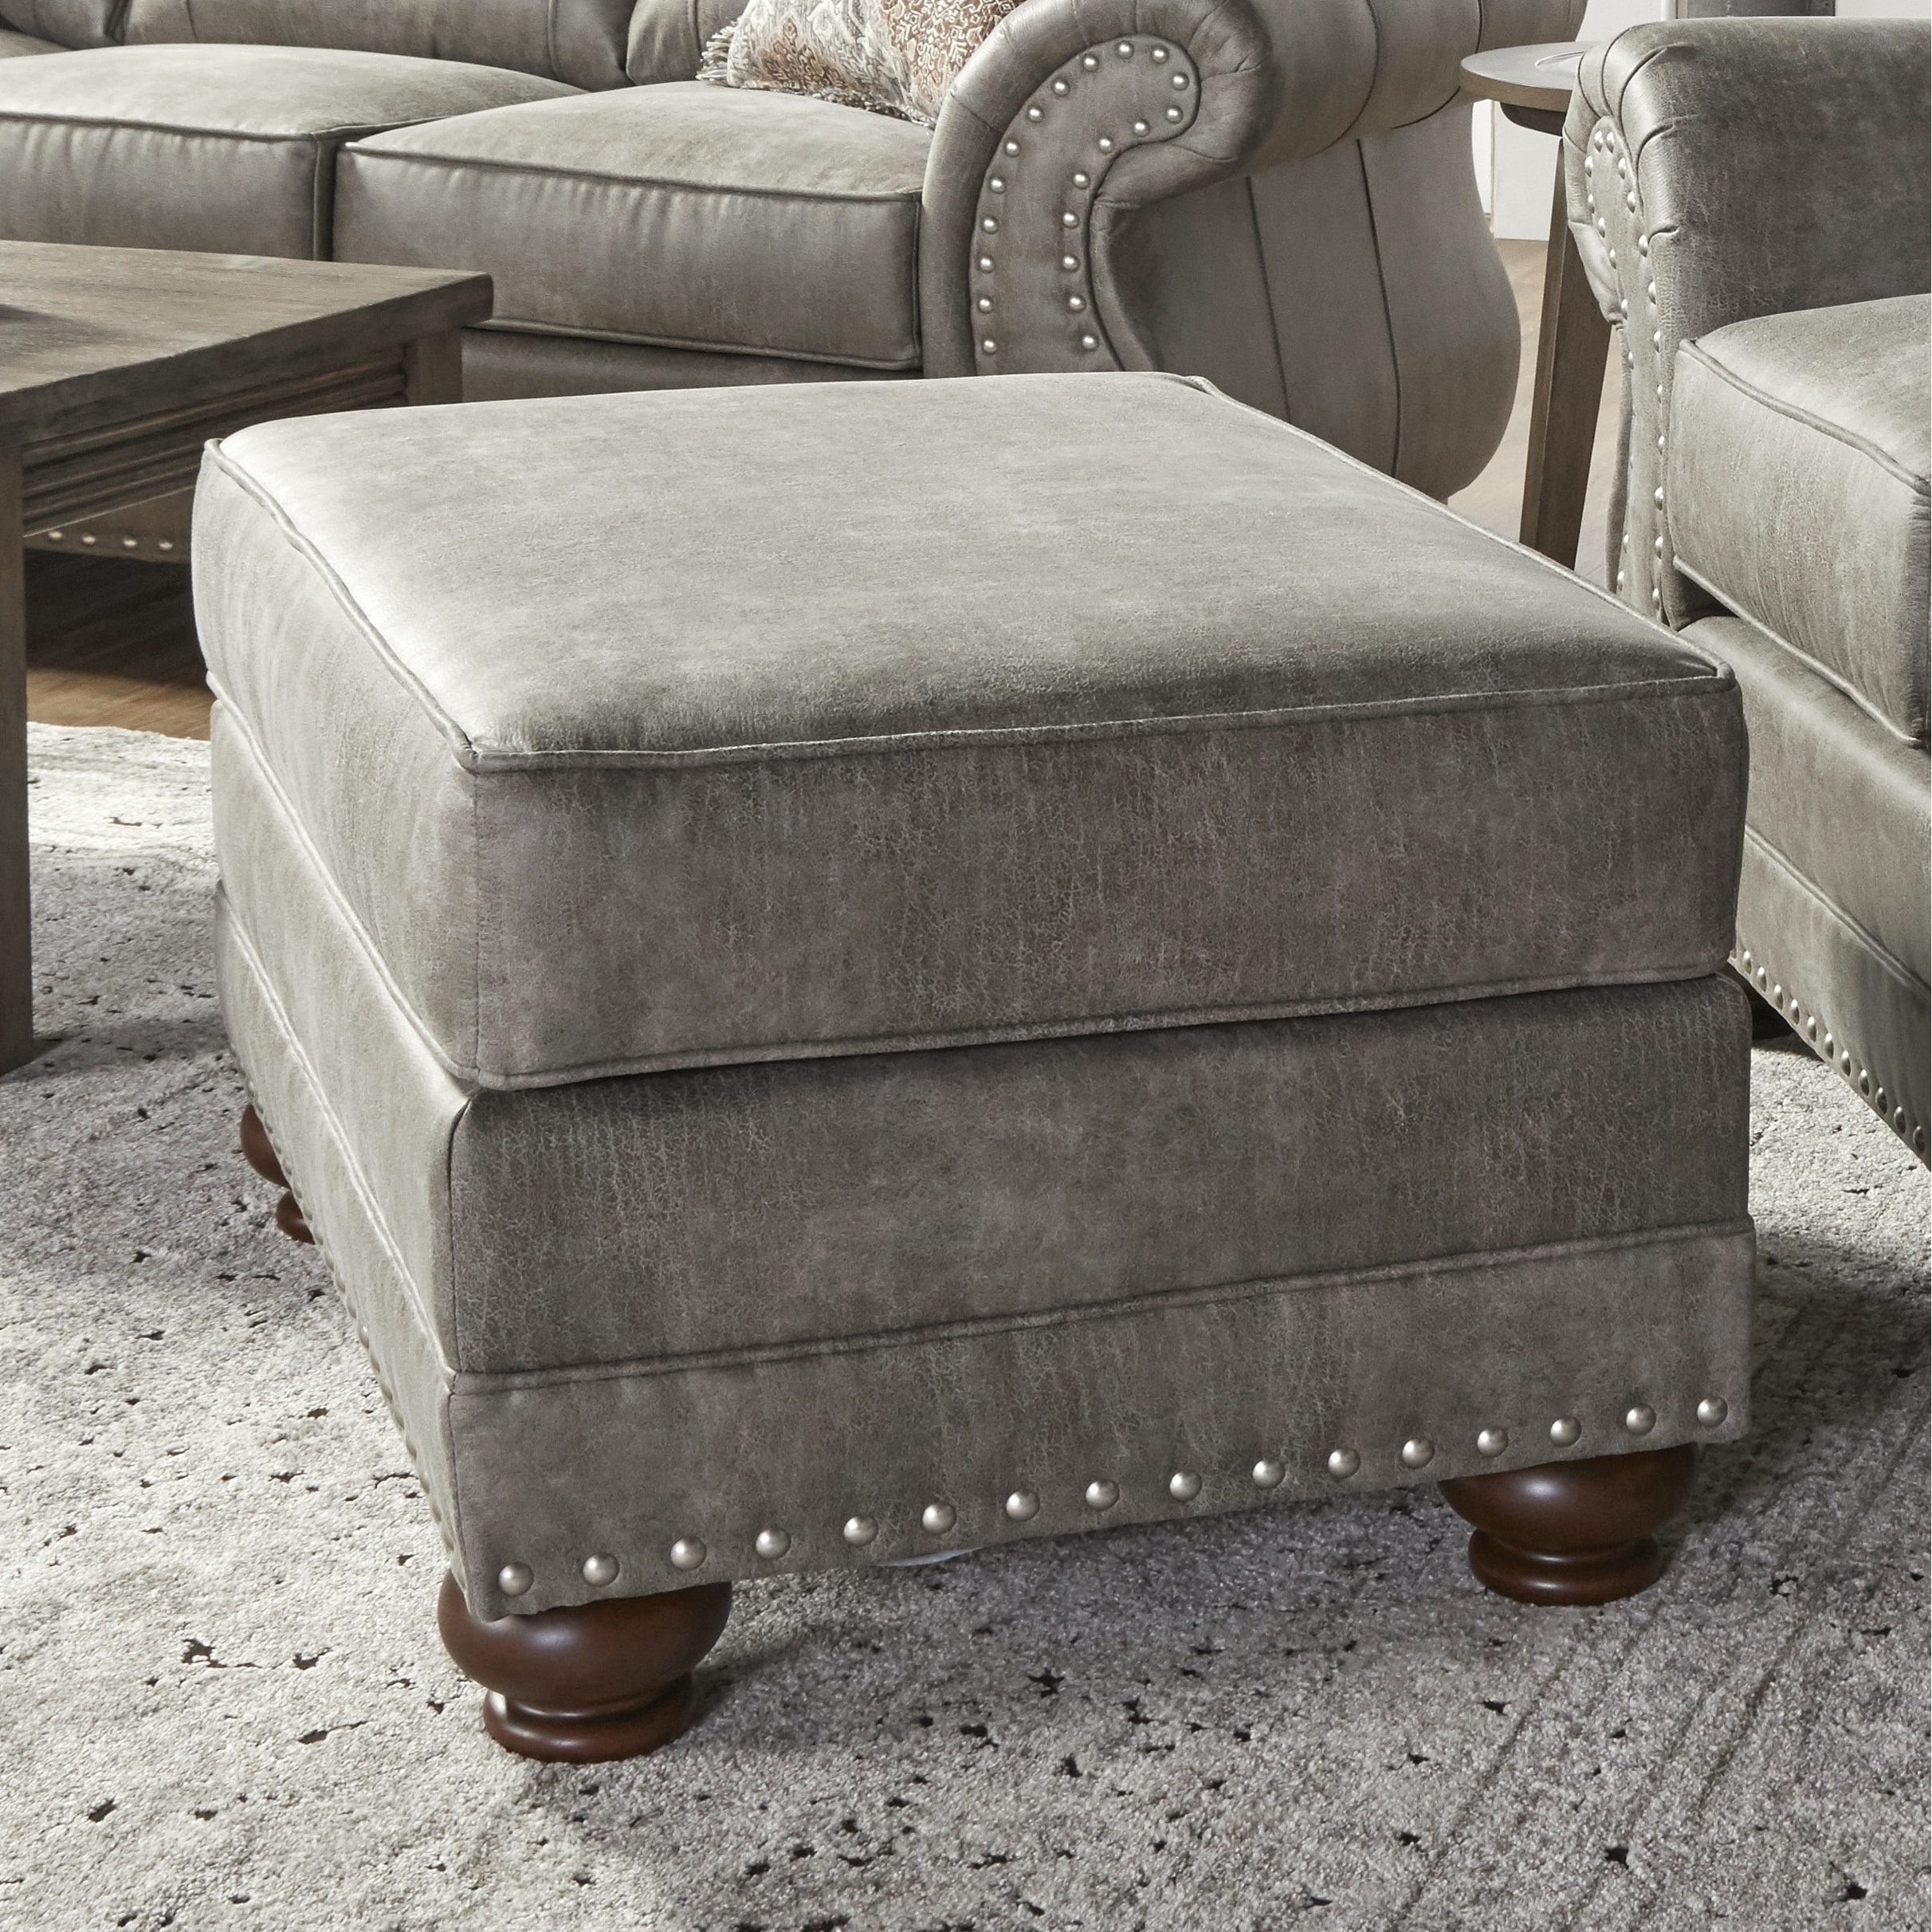 Roundhill Furniture Leinster Faux Leather Upholstered Nailhead Ottoman in Stone Gray